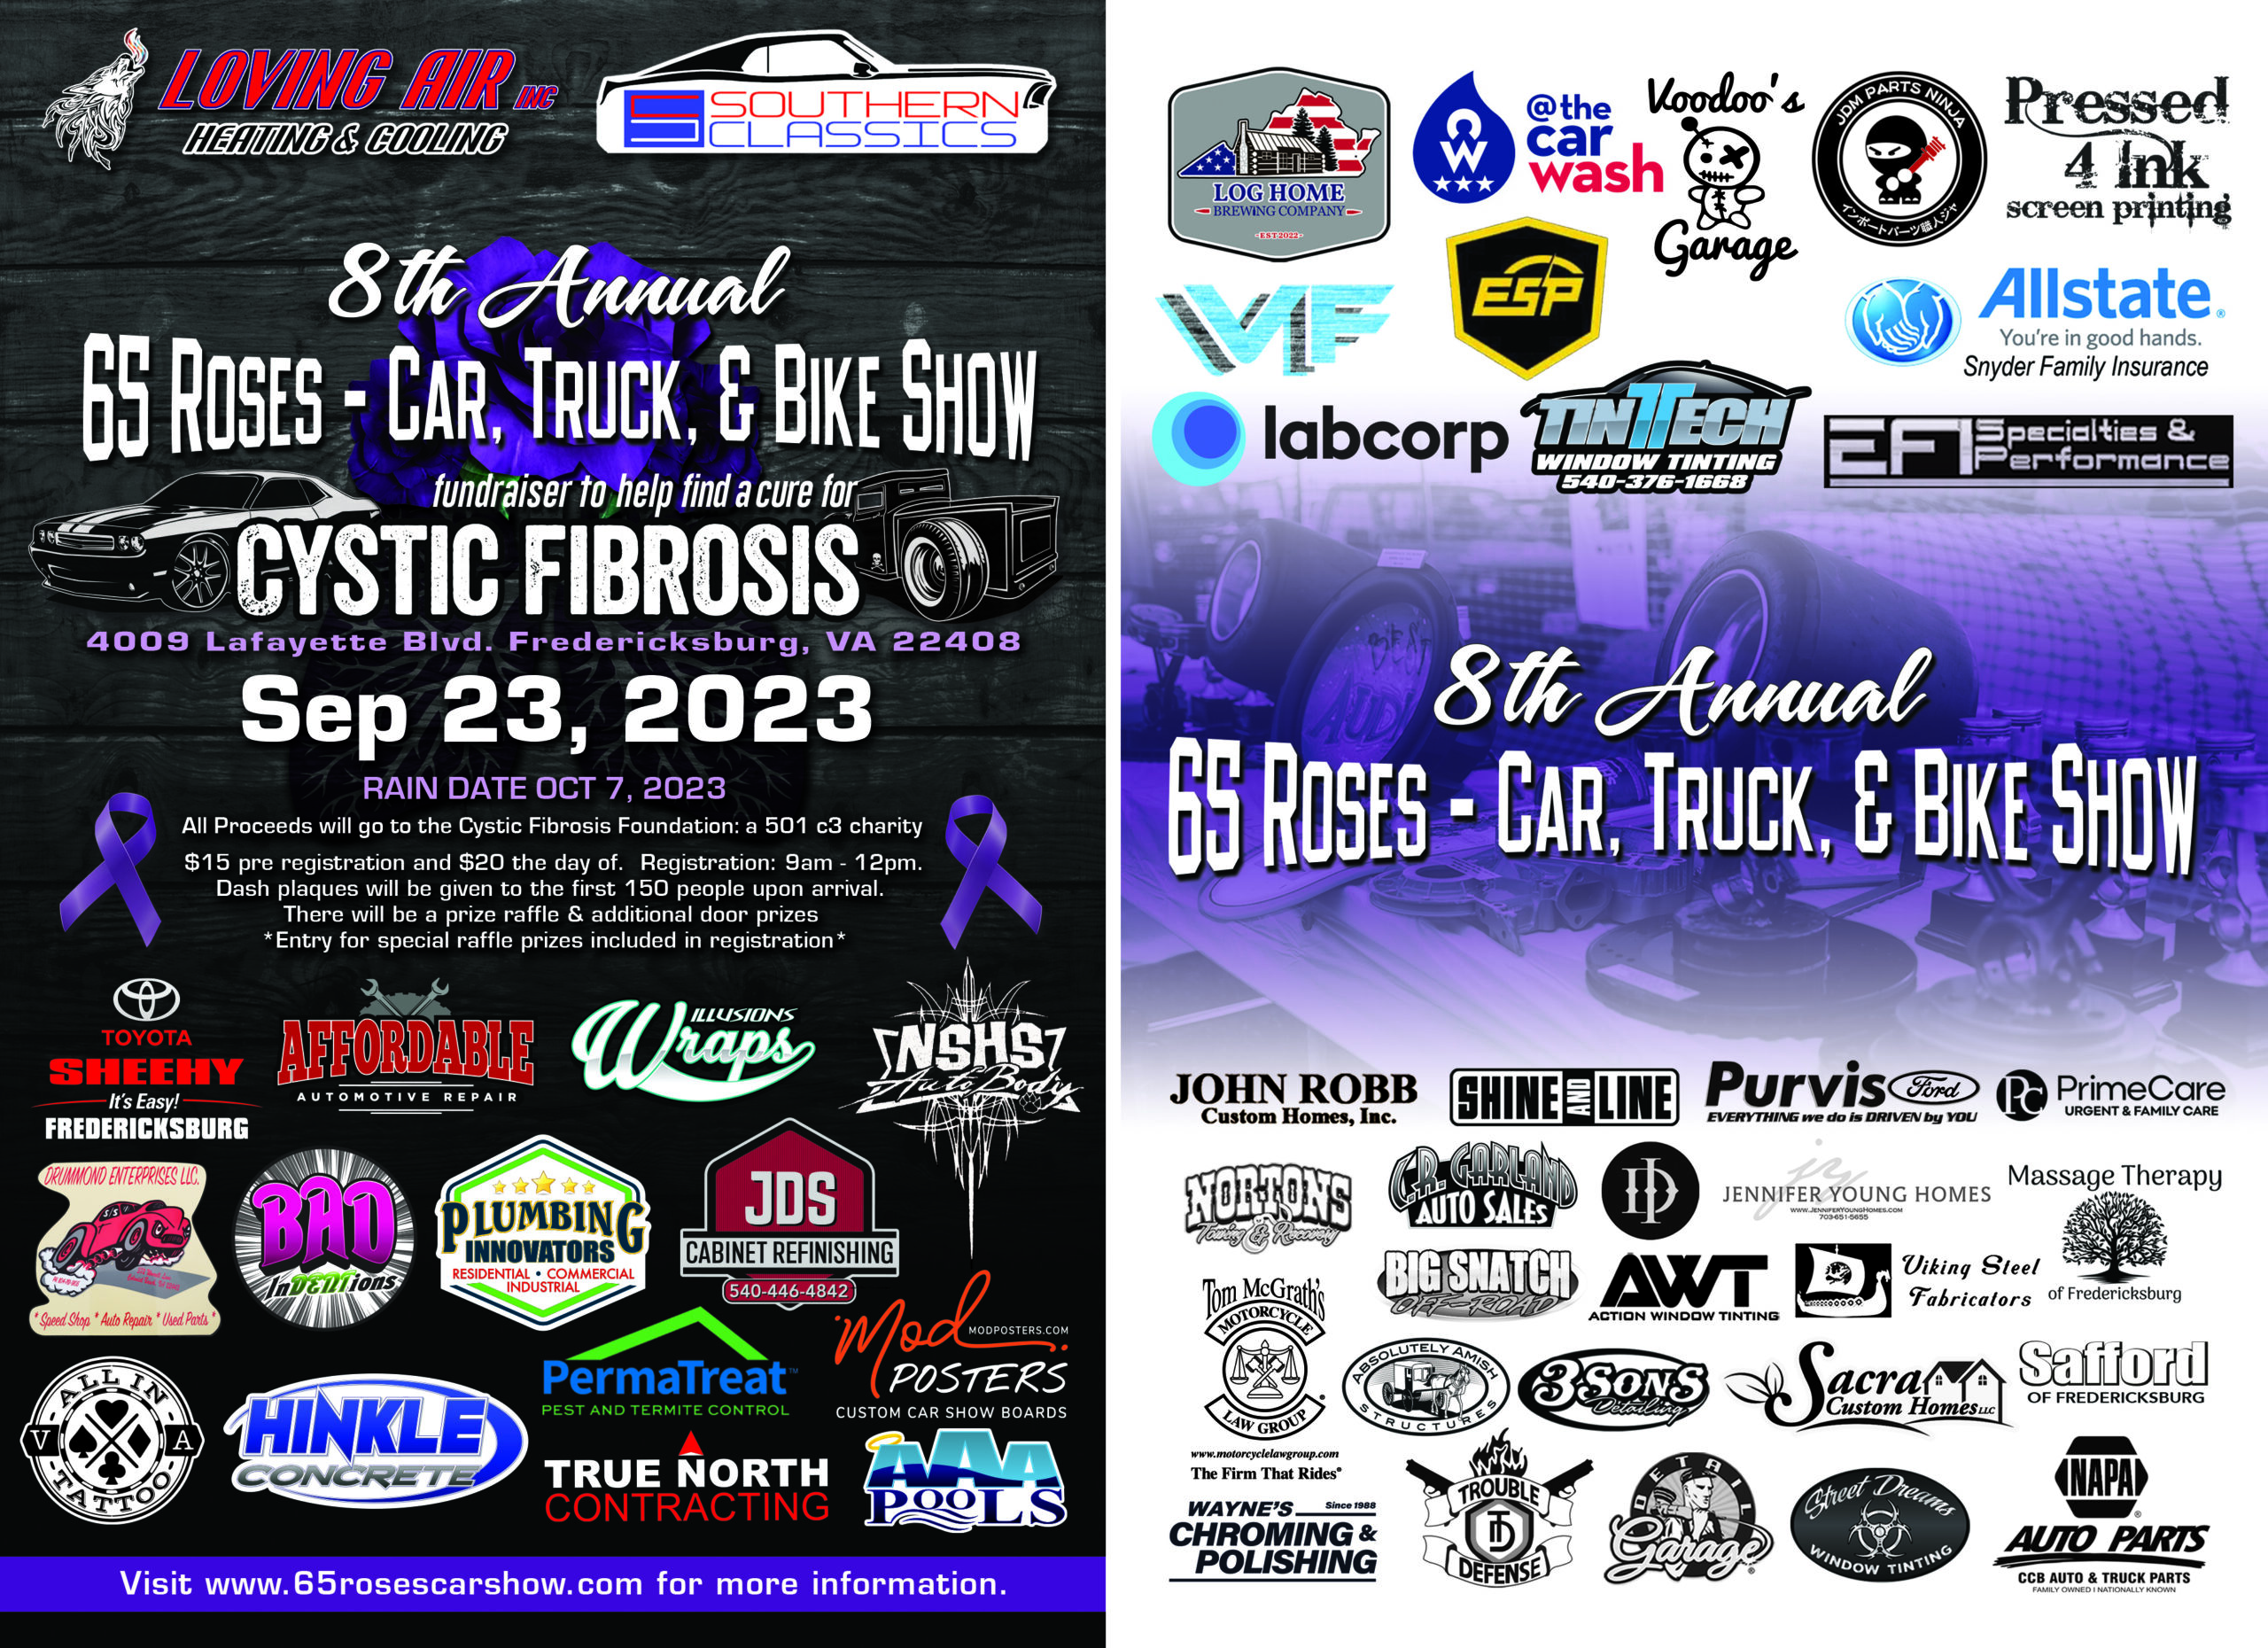 <h1 class="tribe-events-single-event-title">65 Roses Car, Truck, Bike Show Benefiting Cystic Fibrosis</h1>